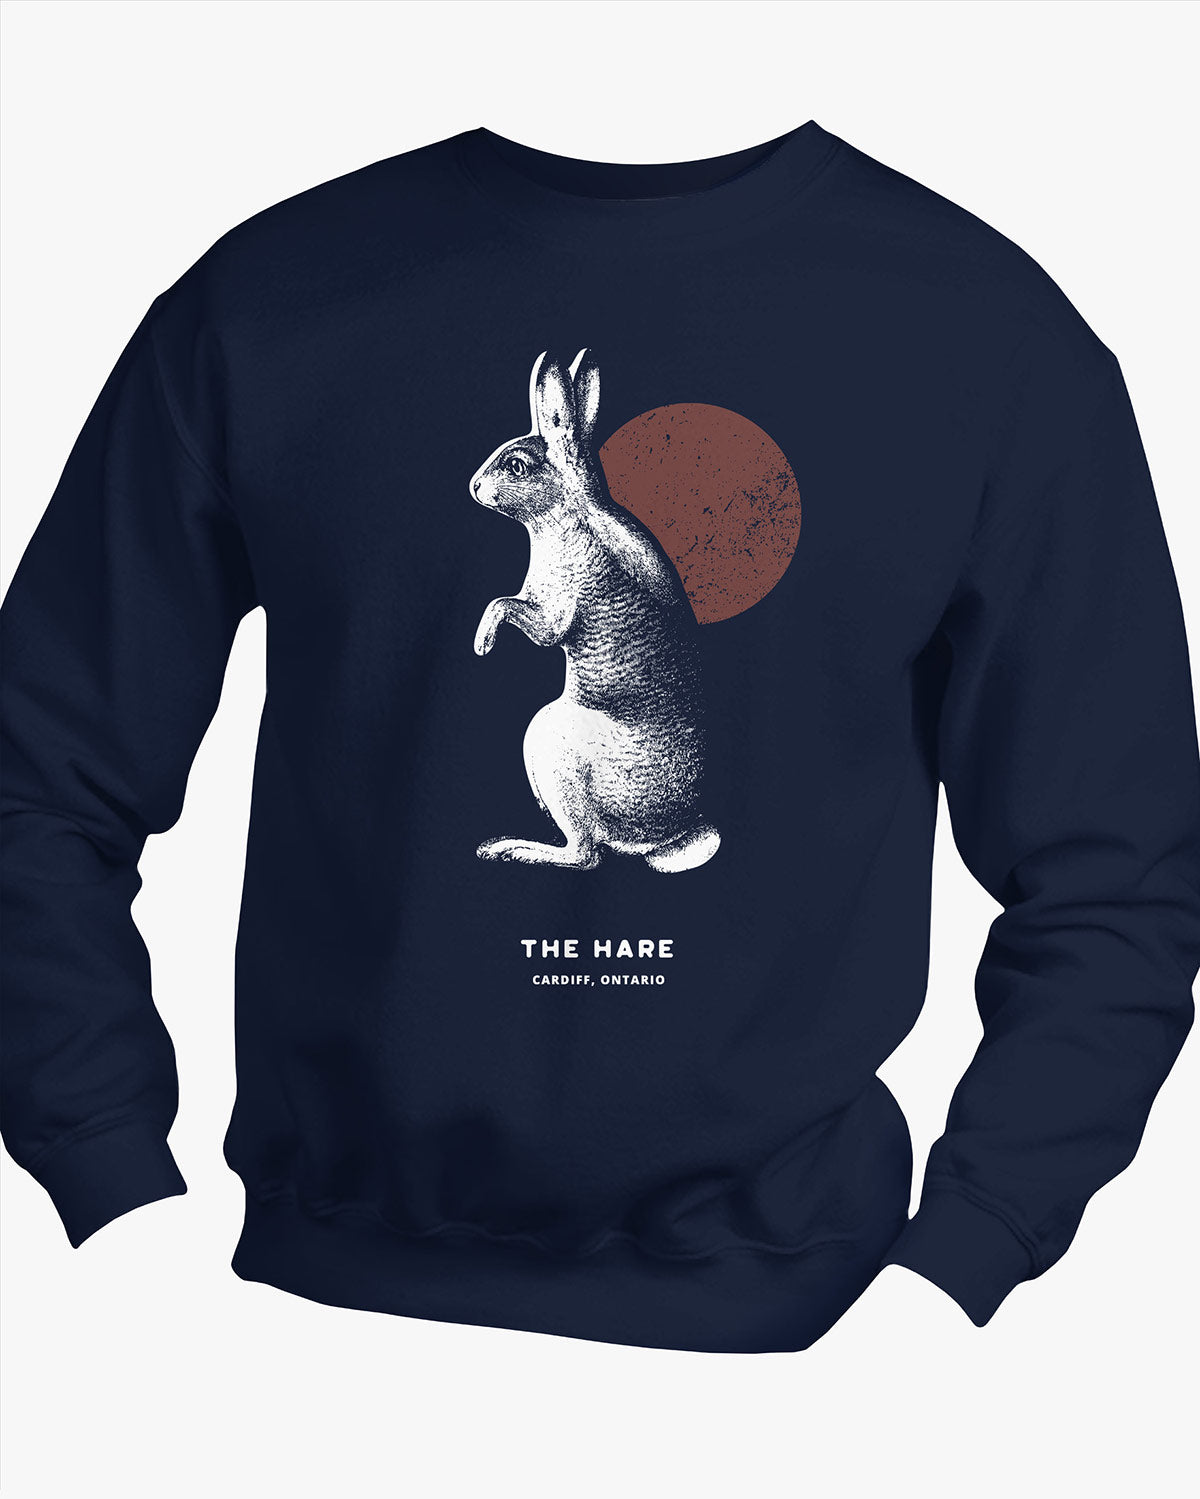 The Hare - Cardiff - Sweater